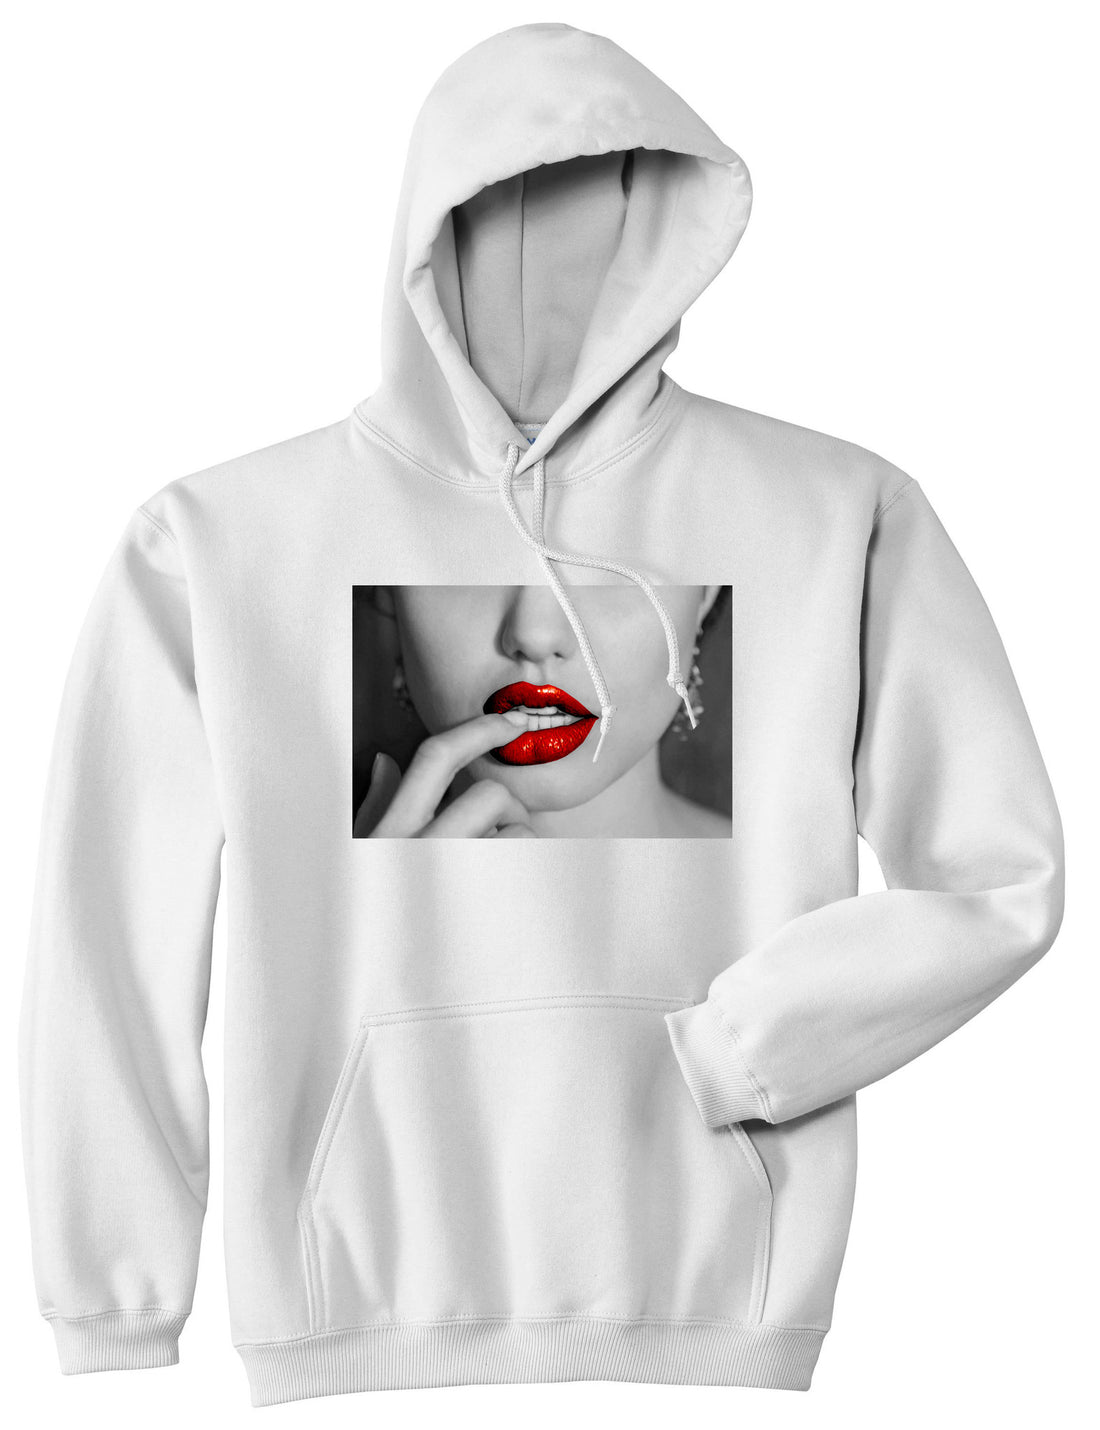  Angelina Red by Kings Of NY Lips Jolie Sexy Hot Picture Pullover Hoodie Hoody in White by Kings Of NY